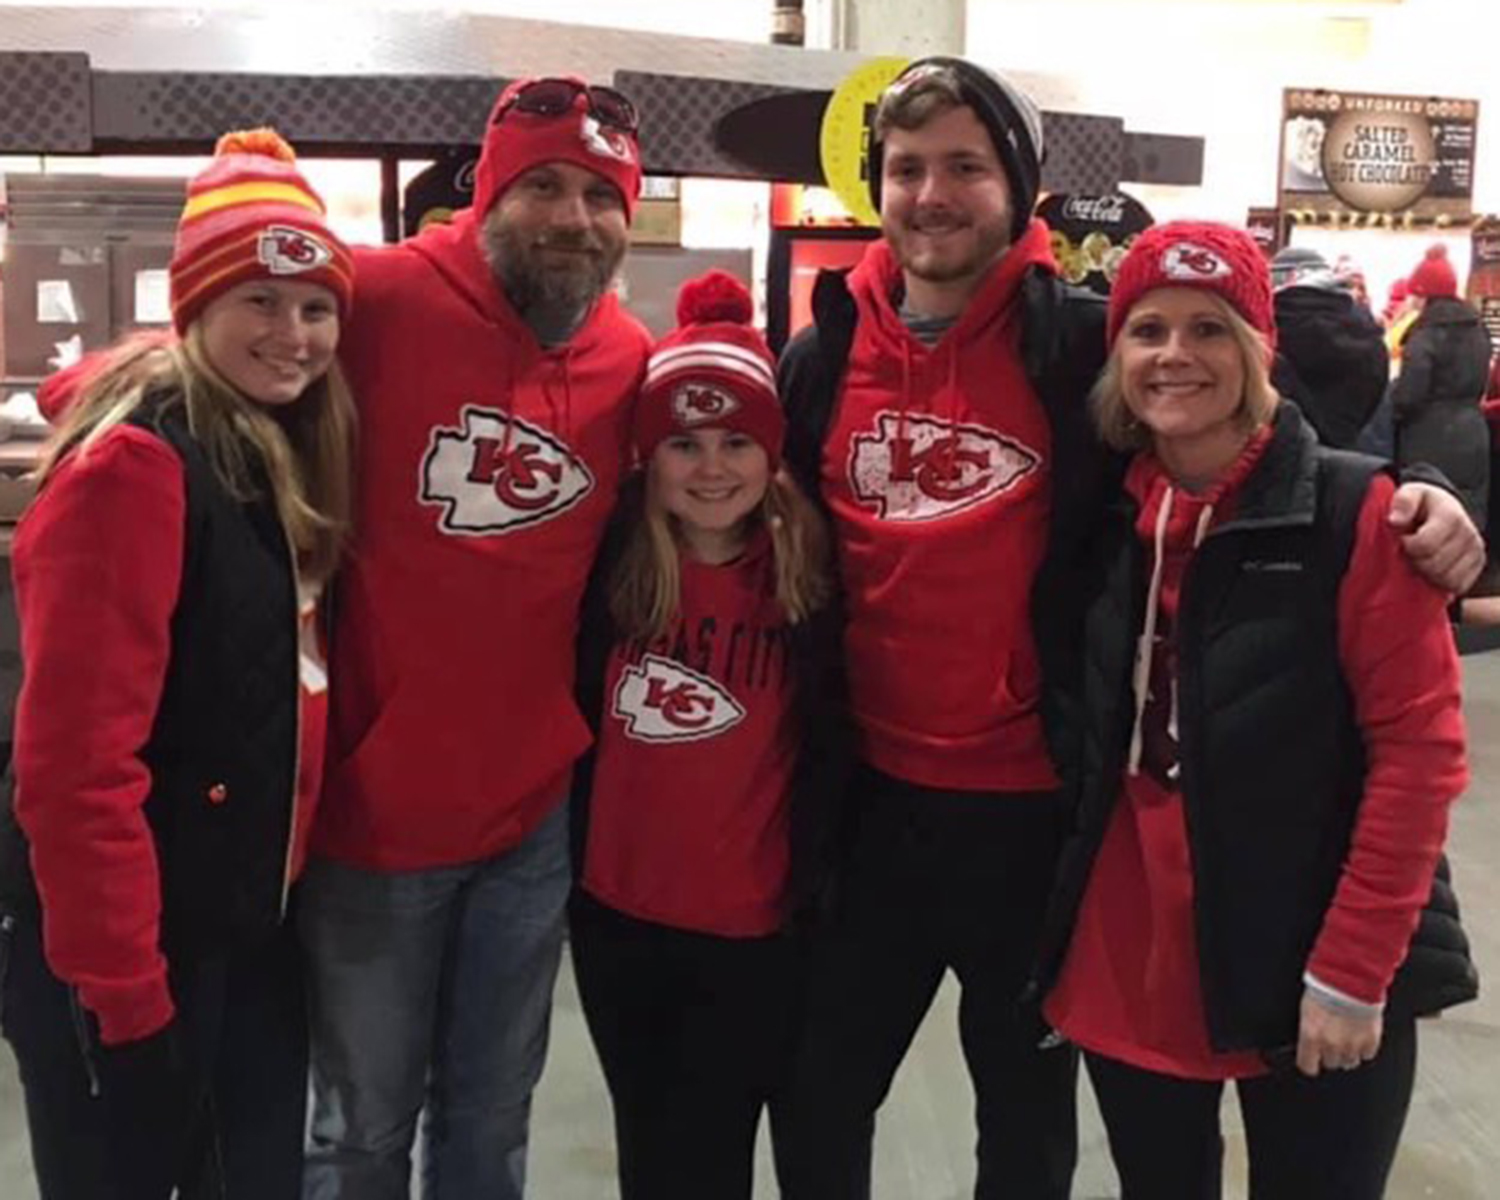 Dustin Cox with his family at a Chiefs game